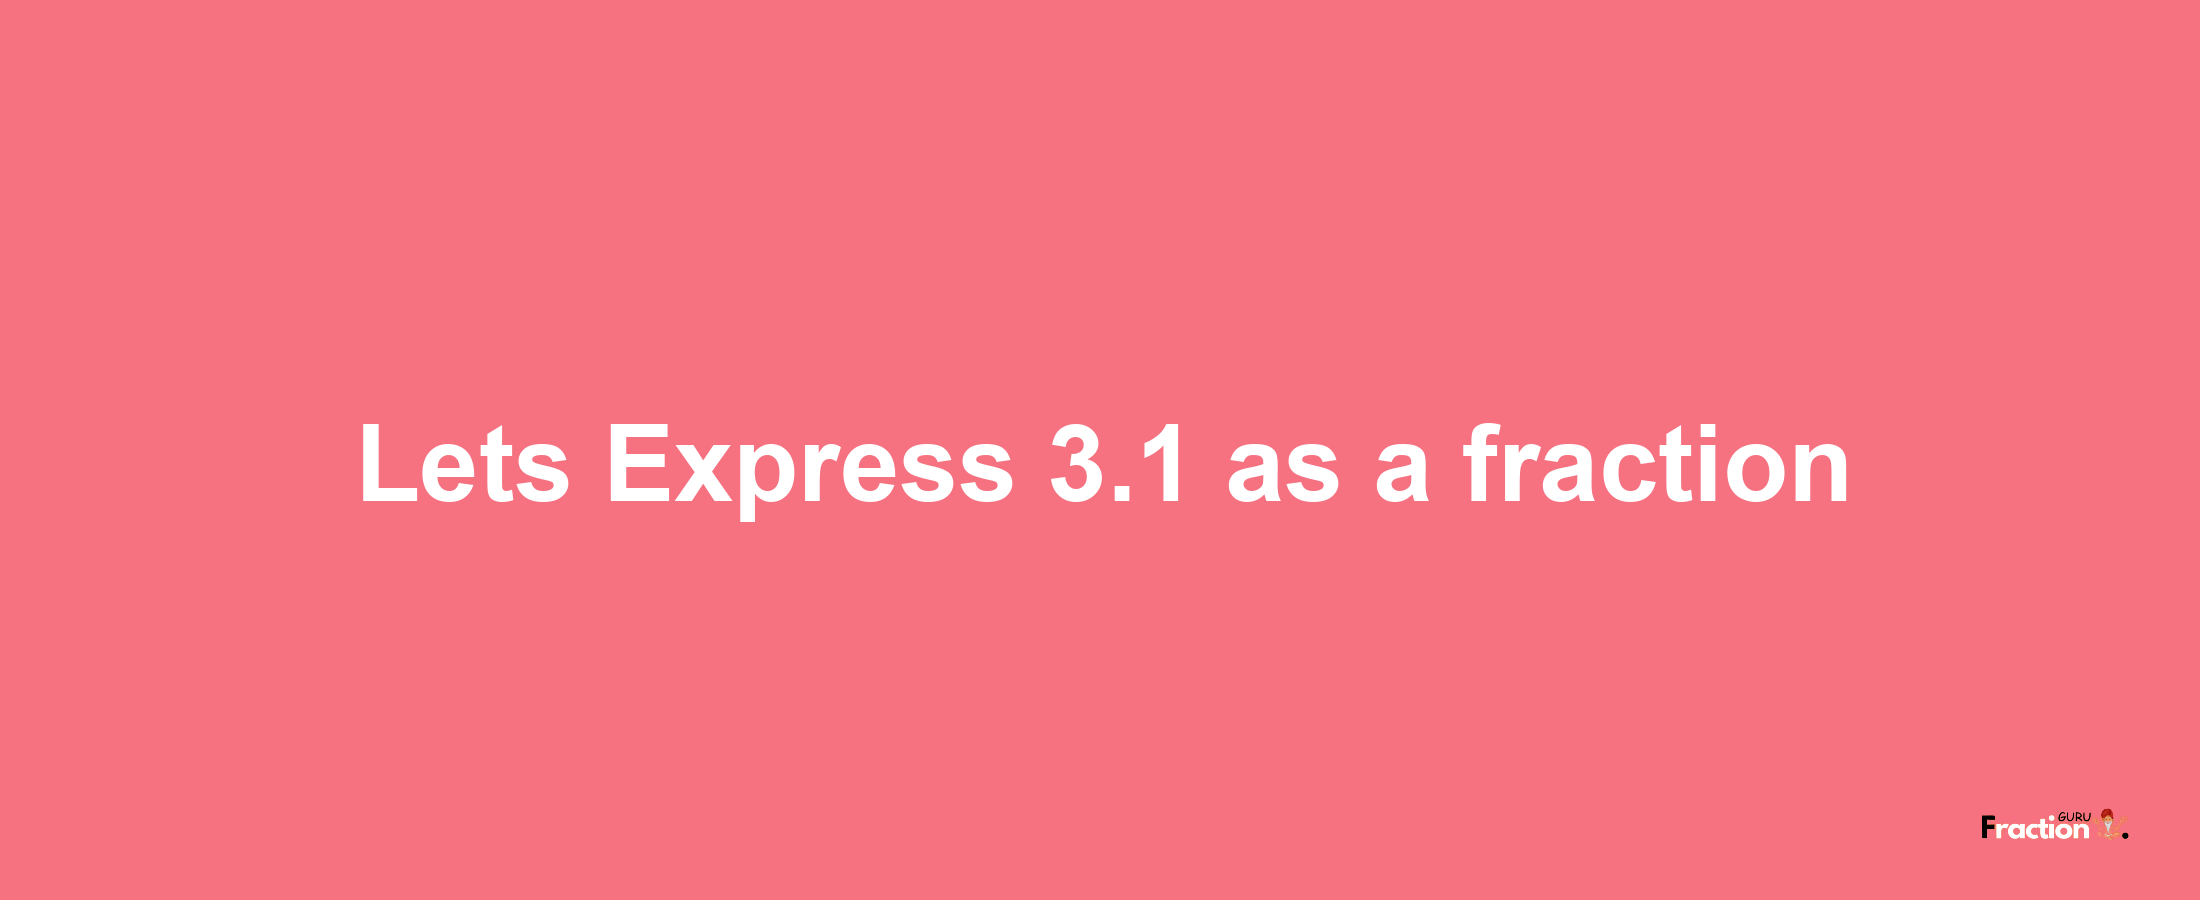 Lets Express 3.1 as afraction